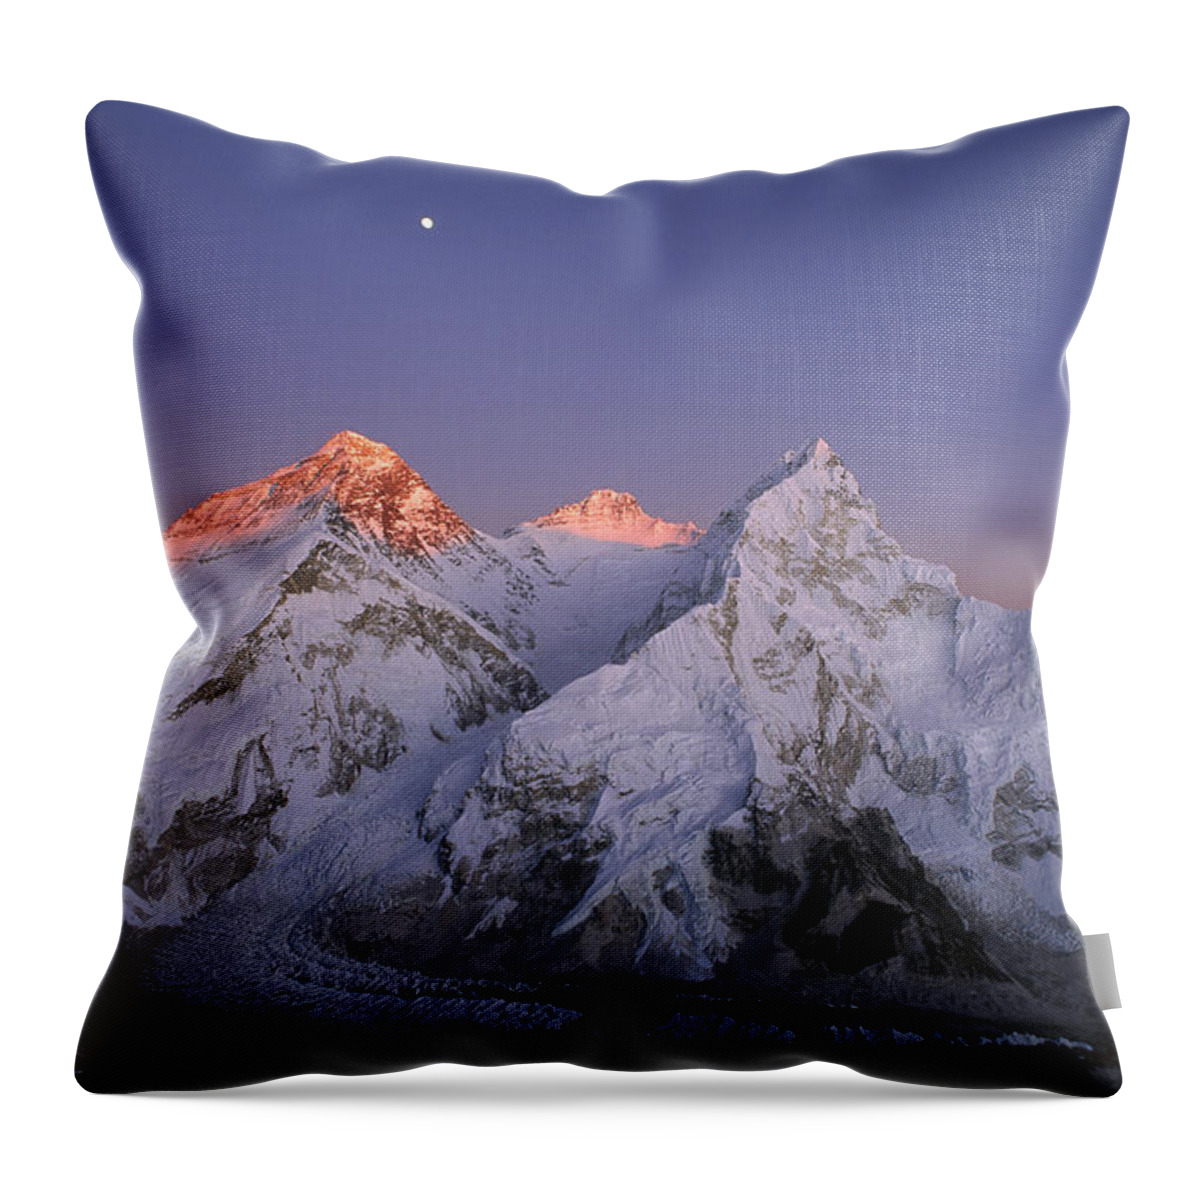 Feb0514 Throw Pillow featuring the photograph Moon Over Mount Everest Summit by Grant Dixon